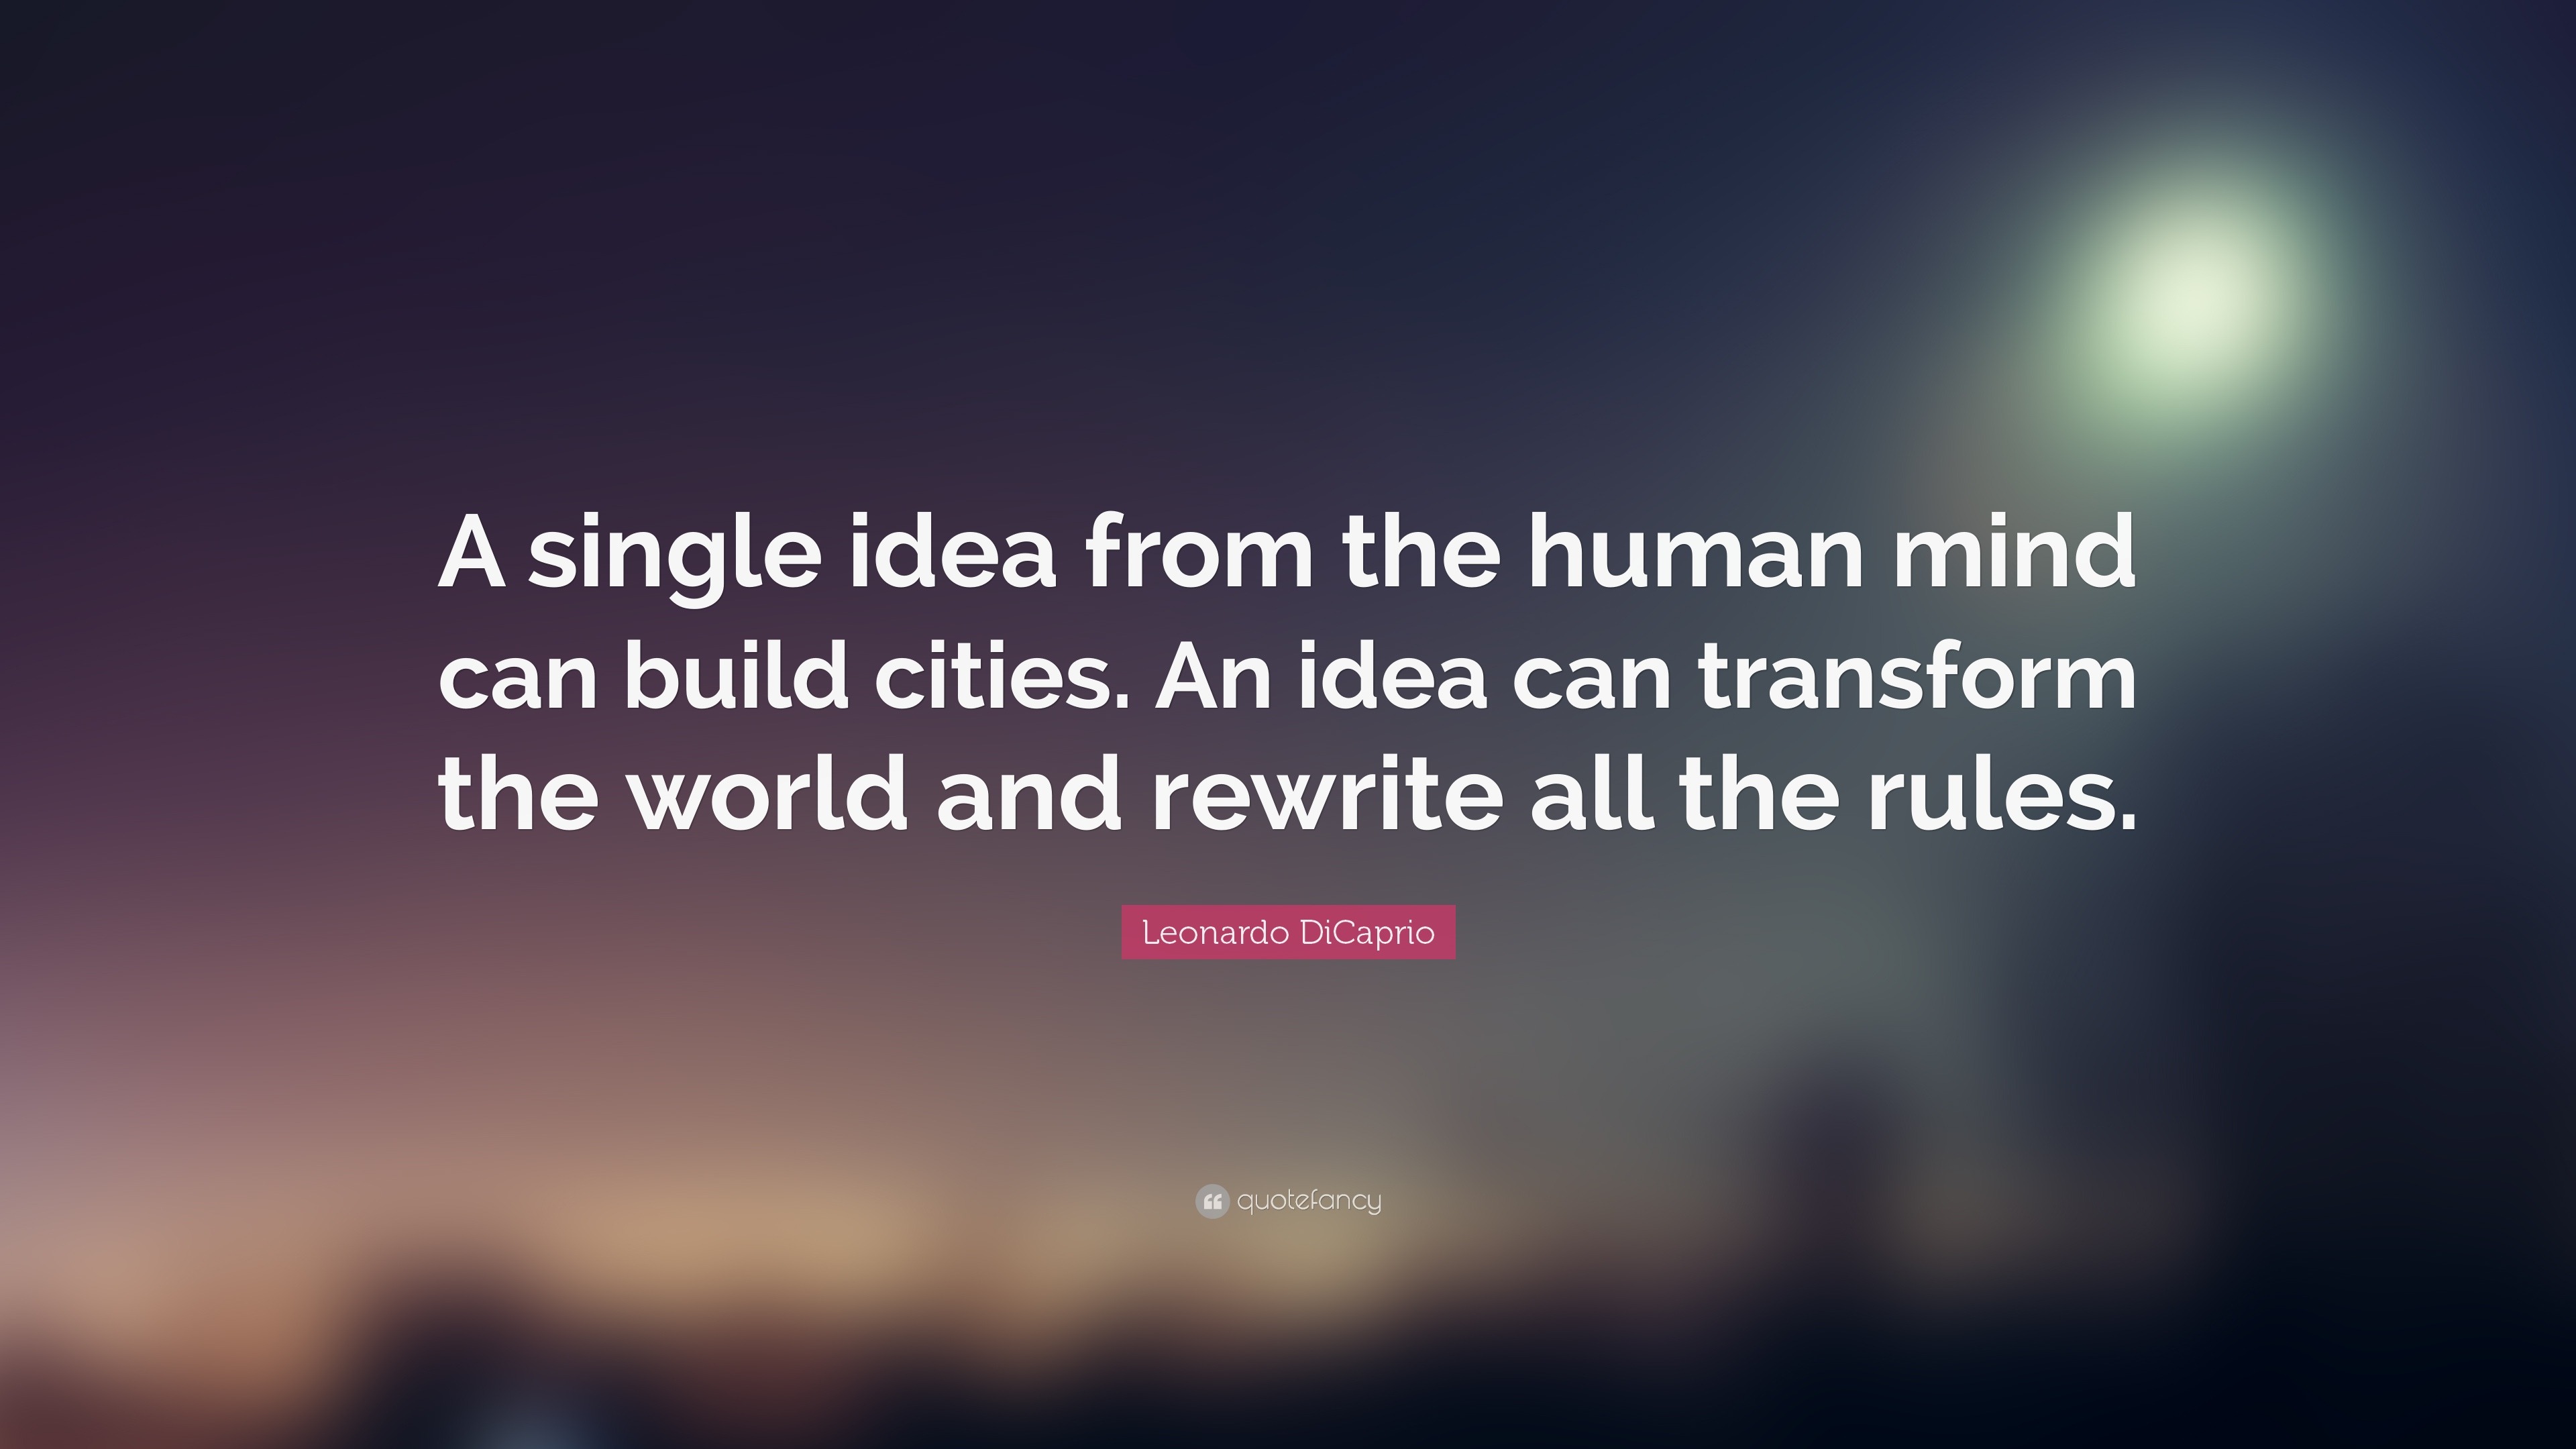 Leonardo Dicaprio Quote A Single Idea From The Human Mind Can Build Cities An Idea Can Best ★human mind quotes★ at quotes.as. a single idea from the human mind can